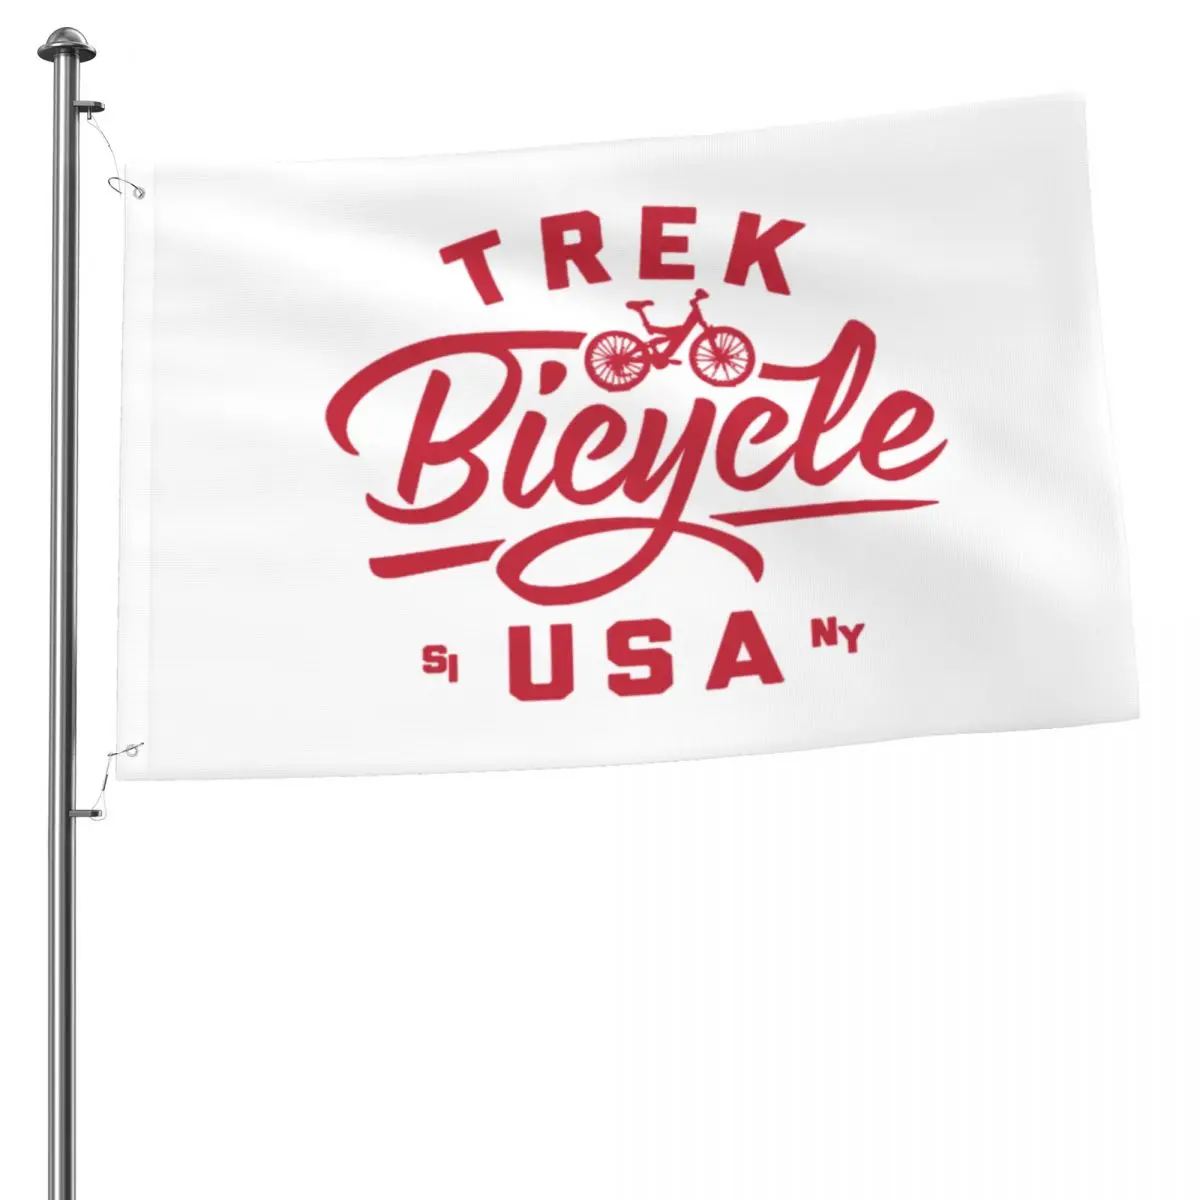 

Trek Bicycle USA Outdoor Flag Decorative Banners For Home Decor House Yard Outdoor Party Supplies 2x3ft